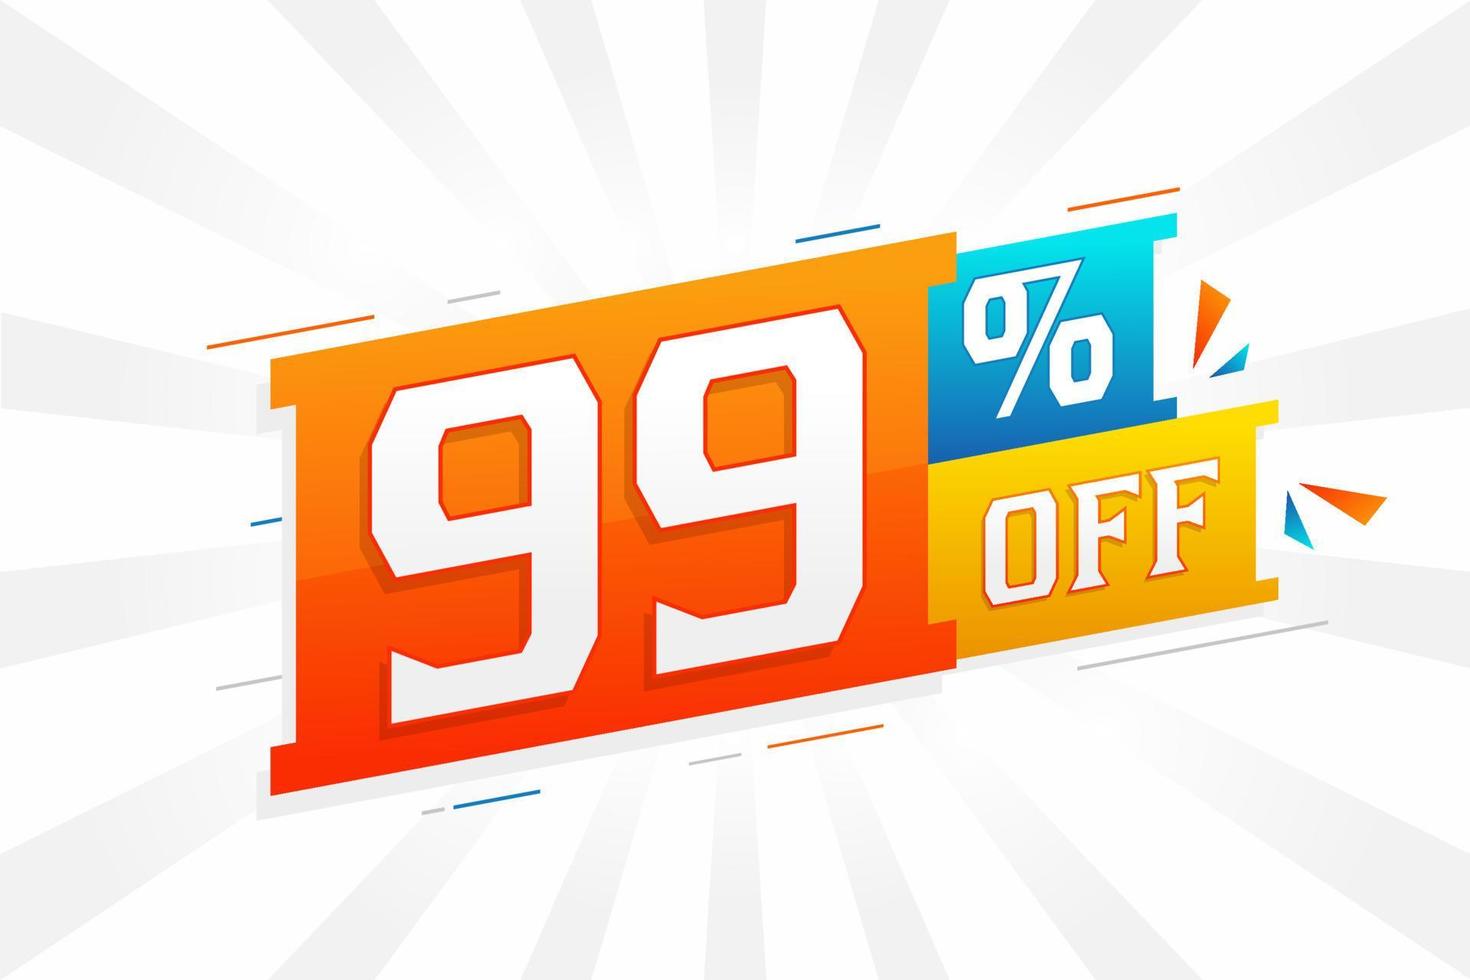 99 Percent off 3D Special promotional campaign design. 99 of 3D Discount Offer for Sale and marketing. vector